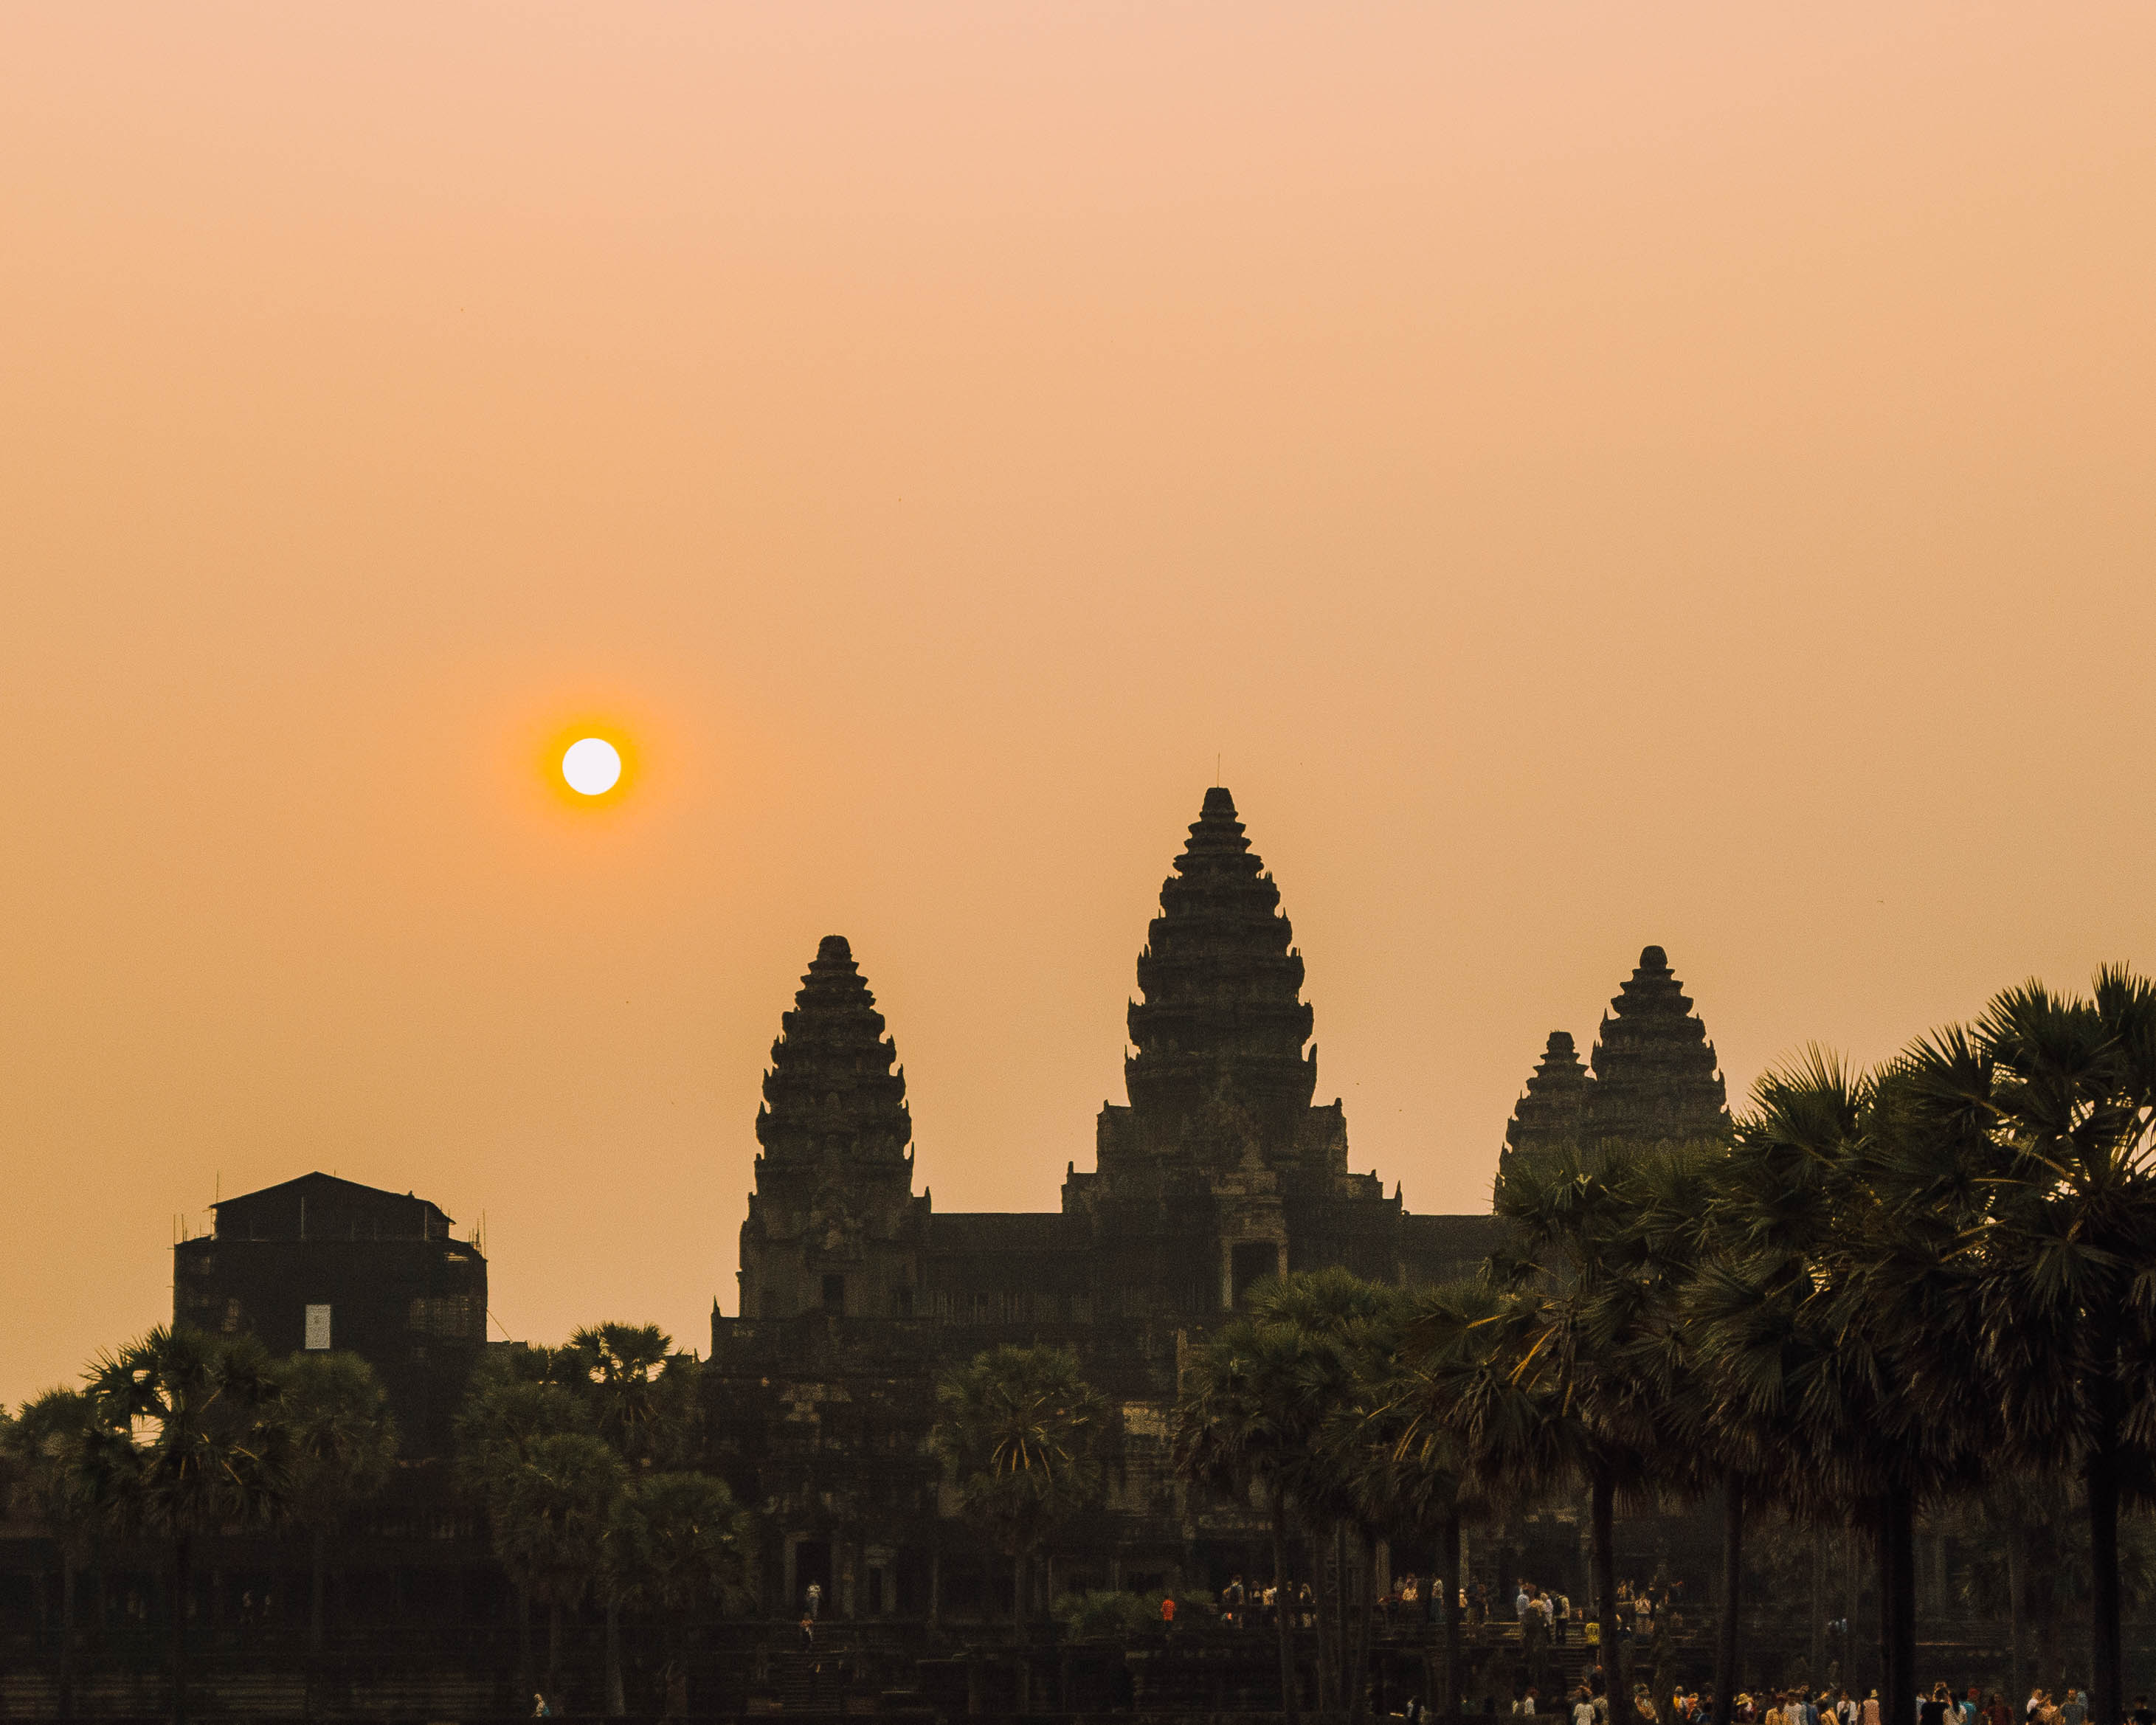 Sunrise at Angkor Wat - Check our top tip to know where to go and when - wediditourway.com